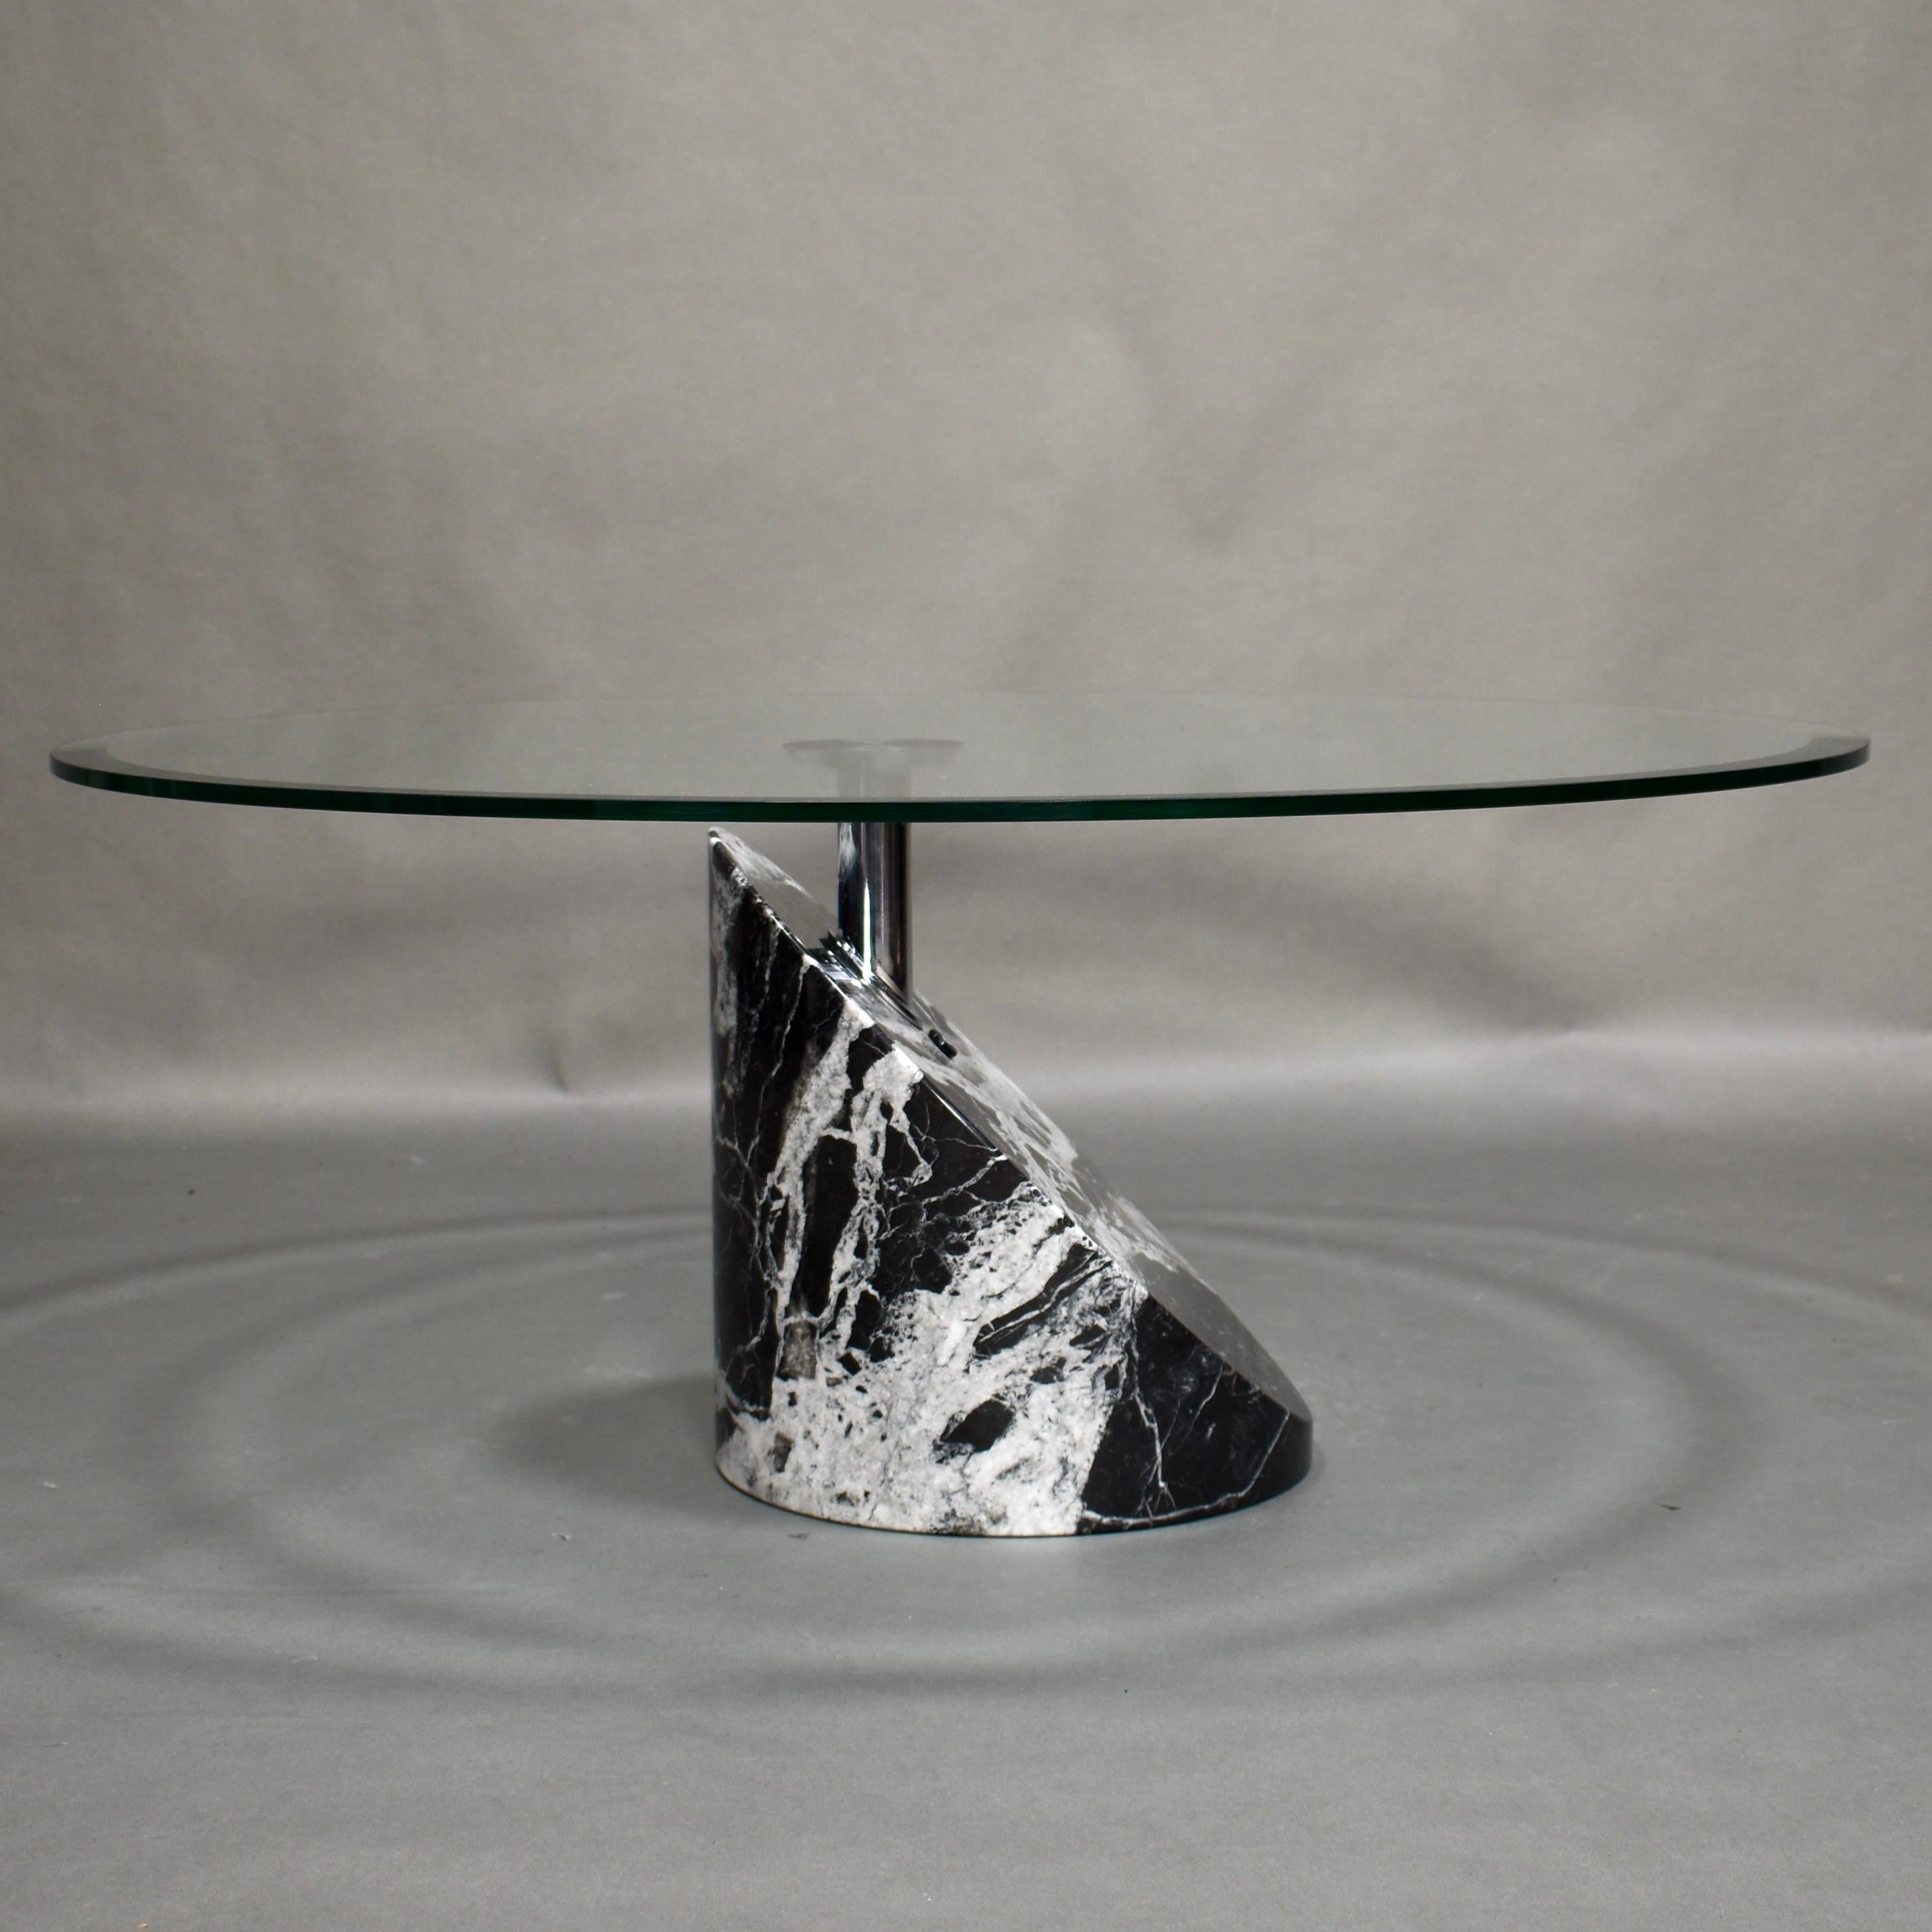 Exclusive Italian ‘Carre VI’ coffee table by Giorgio and Maurizio Cattelan, Italy, circa 1980.
The marble base is made out of one block of solid marble. The marble features black, white, grey and taupe coloring. The hardened glass can be swiveled